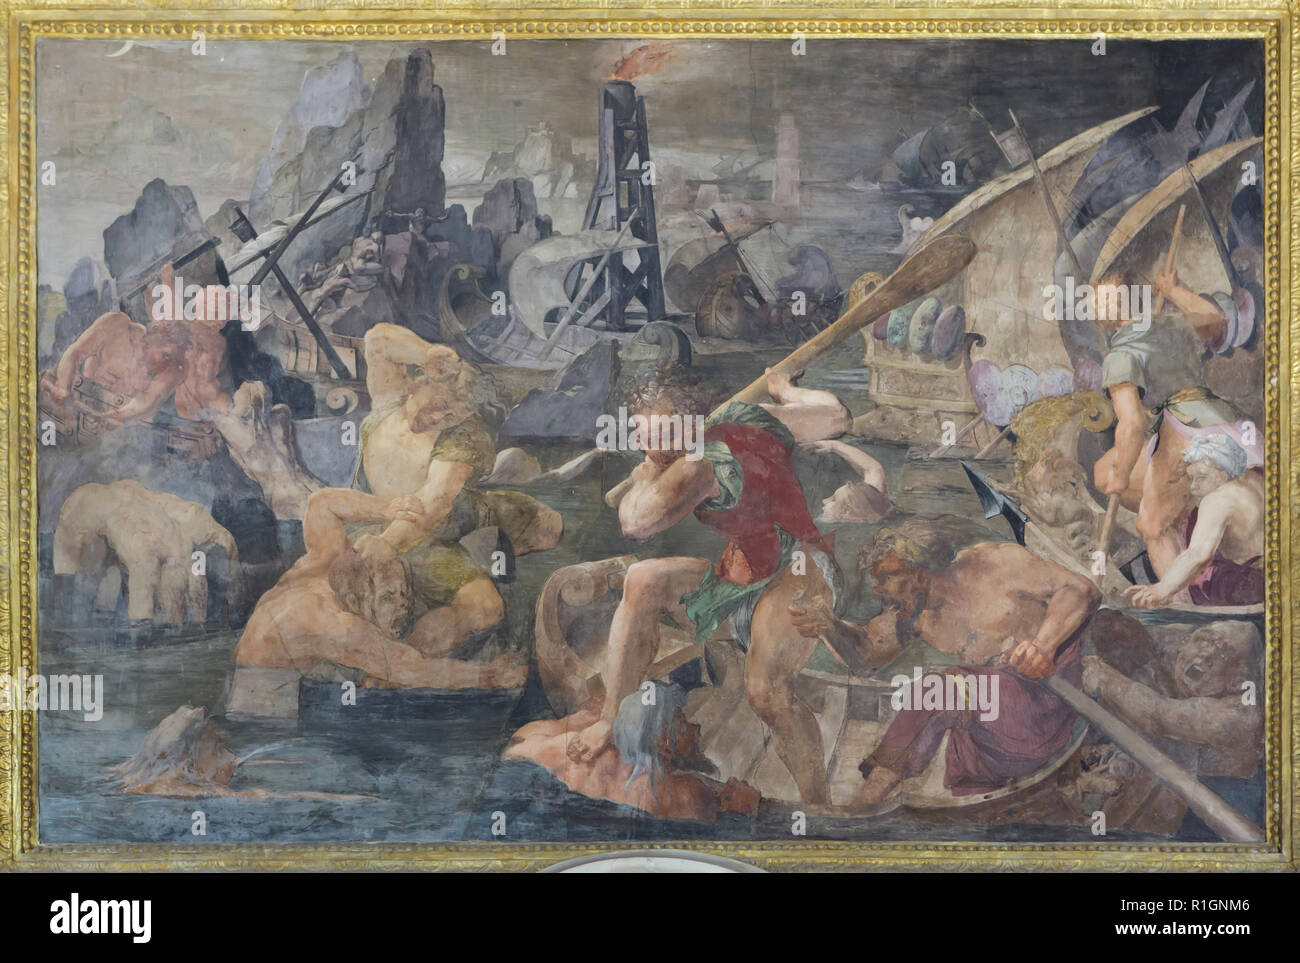 Revenge of Nauplius. Fresco by Italian Mannerist painter Rosso Fiorentino (1535-1537) in the Gallery of Francis I in the Palace of Fontainebleau (Château de Fontainebleau) near Paris, France. Stock Photo